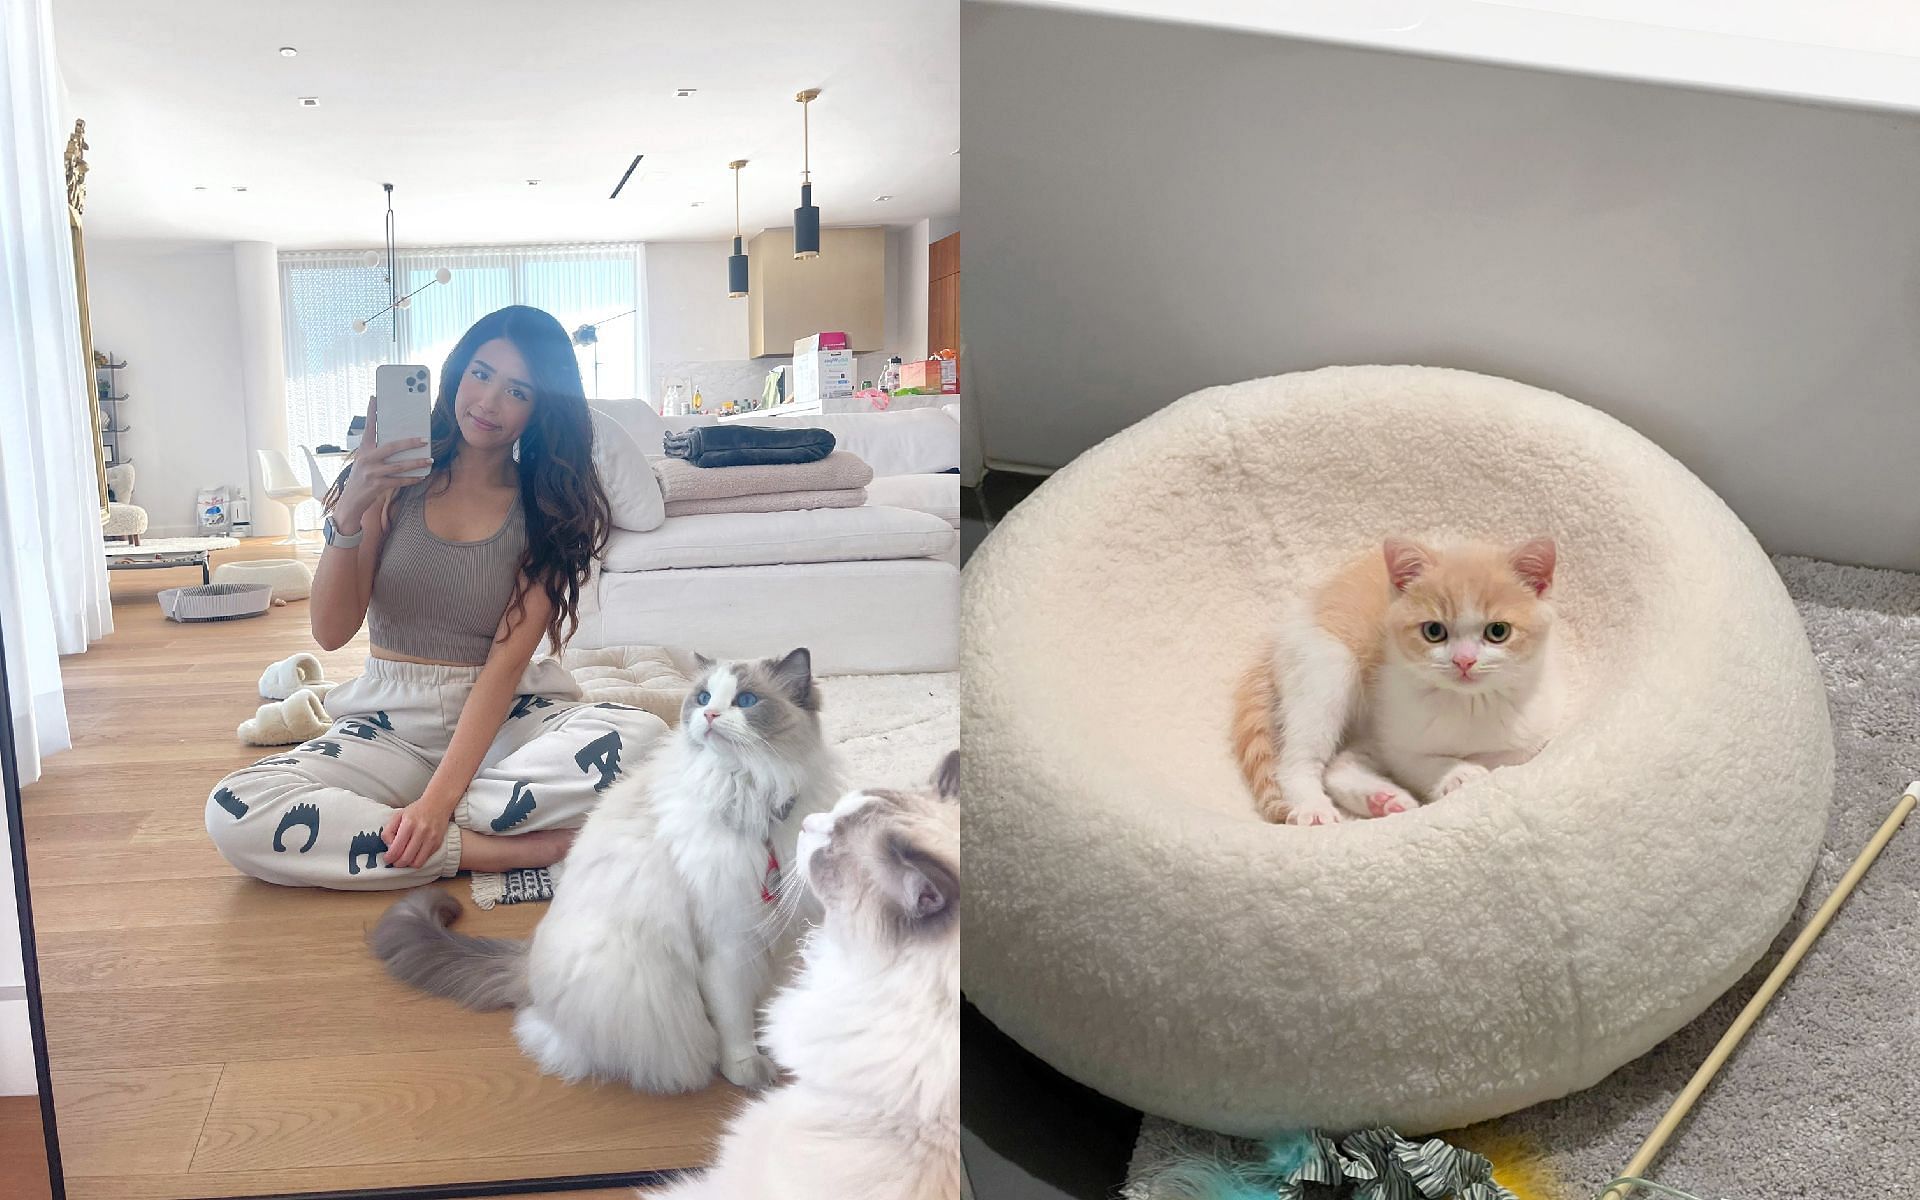 Pokimane revealed that a new cat had become the latest member of her family (Image via Pokimane/Twitter)